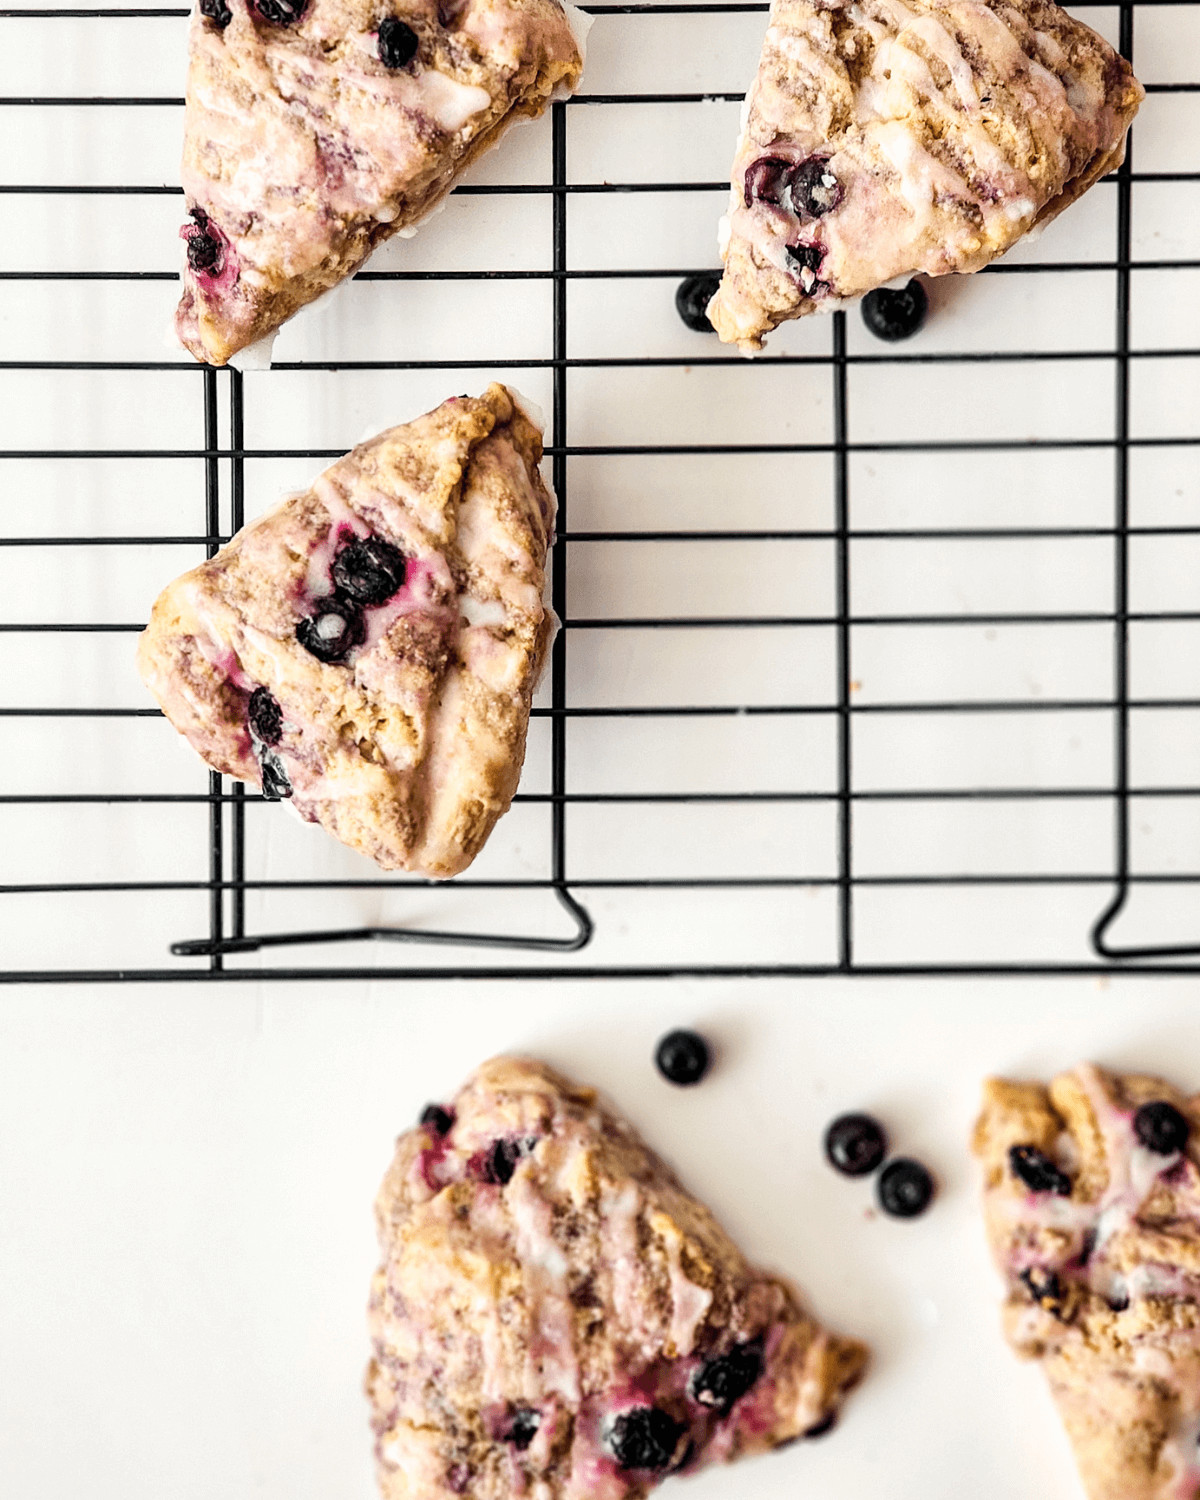 The Starbucks Blueberry Scones on a cooling rack.